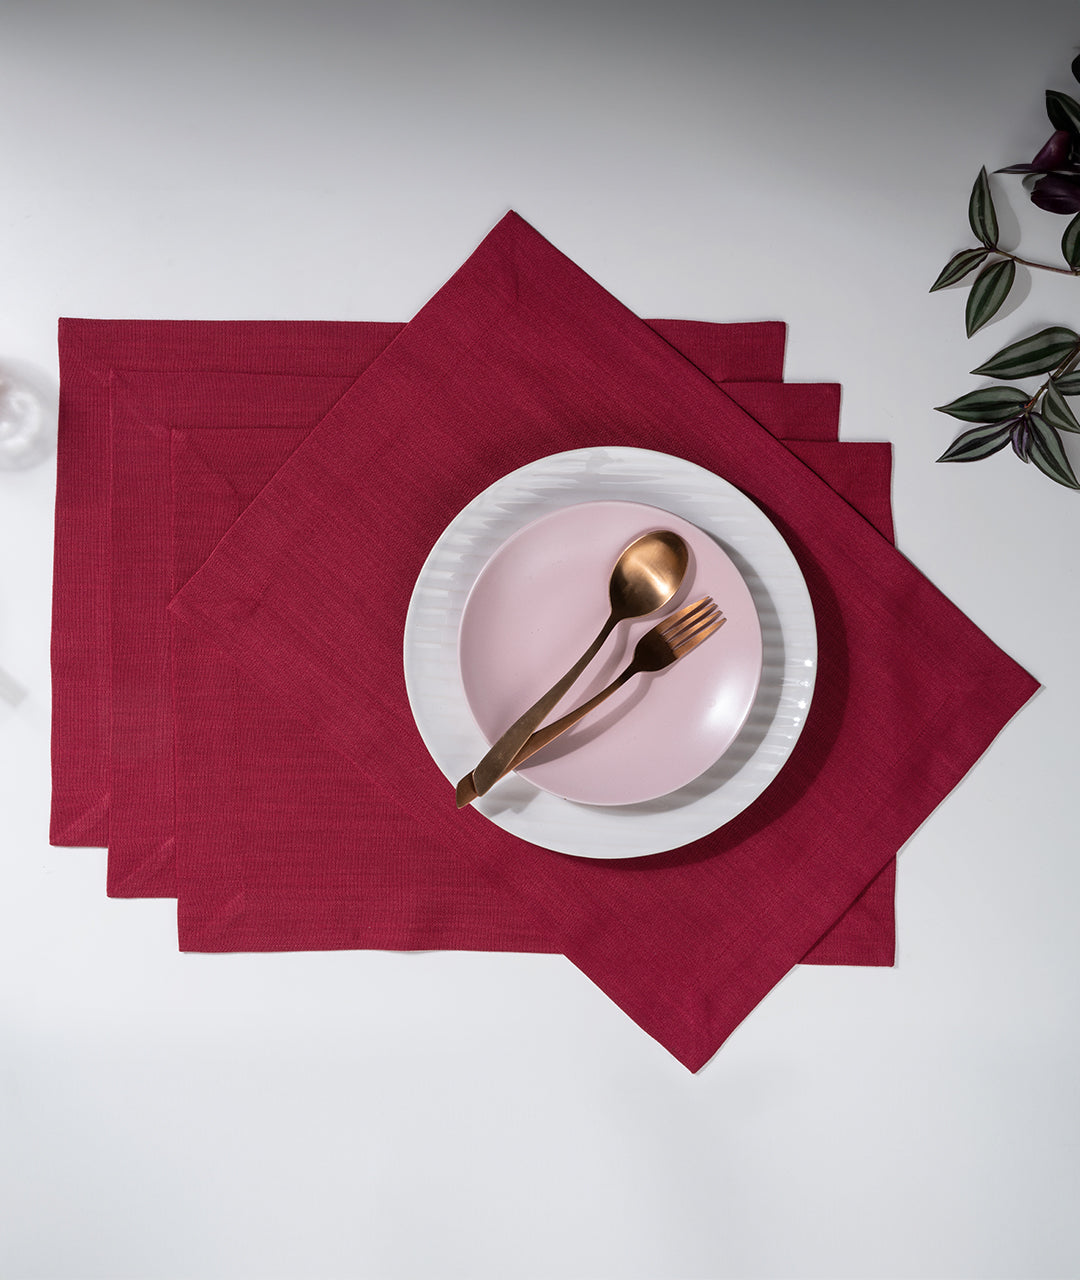 Red Linen Textured Placemats 14 x 19 Inch Set of 4 - Mitered Corner